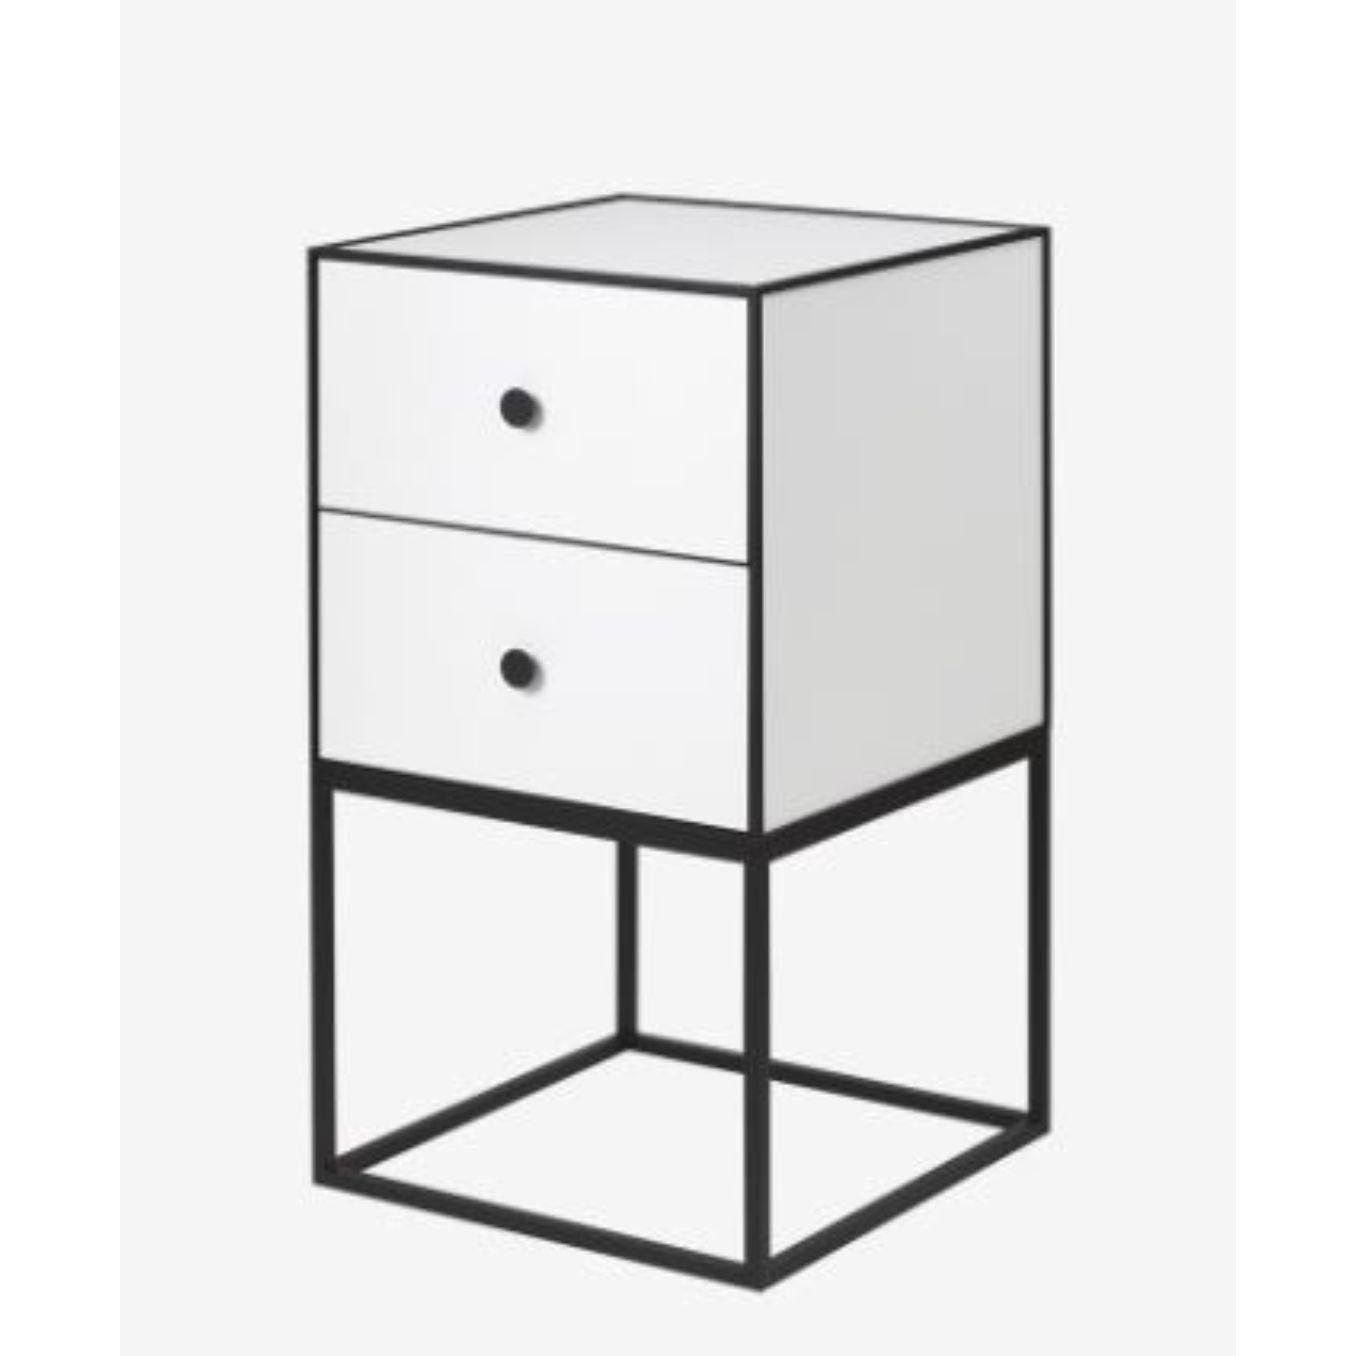 35 white frame sideboard with 2 drawers by Lassen.
Dimensions: D 35 x W 35 x H 63 cm.
Materials: Finér, Melamin, Melamine, Metal, Veneer
Also available in different colors and dimensions. 
Weight: 15.50 Kg

By Lassen is a Danish design brand